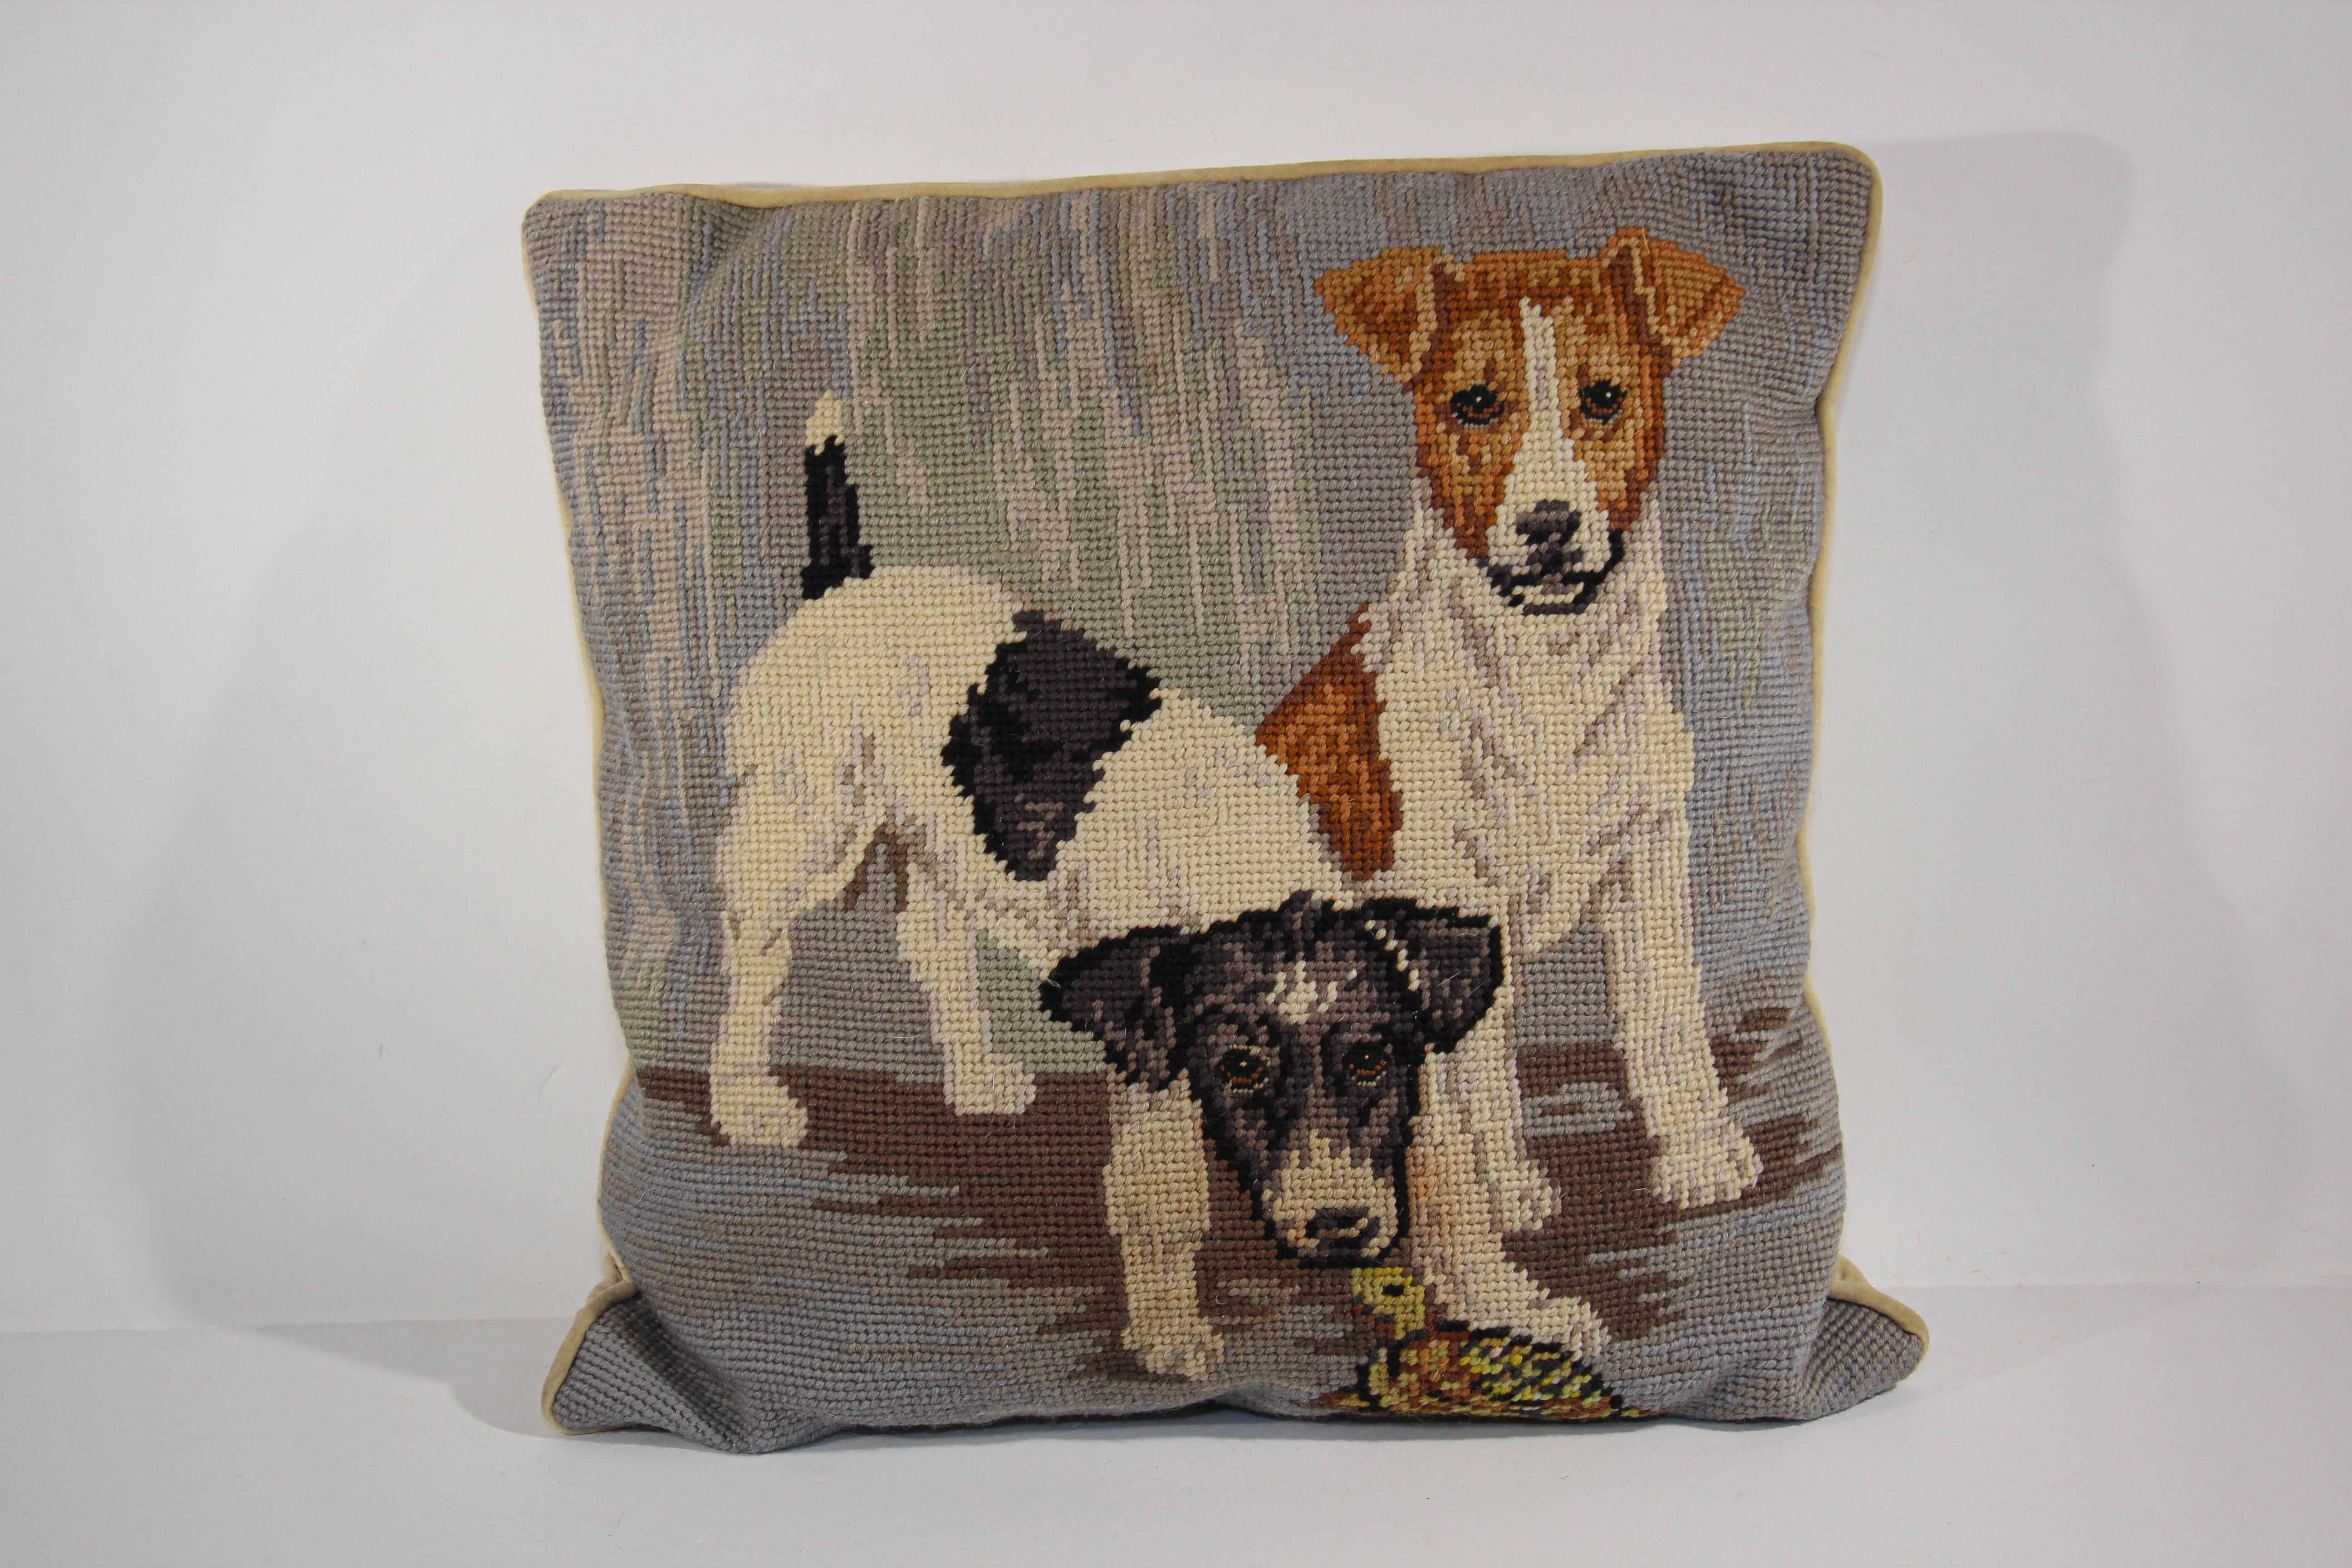 Vintage Charming dog pillow featuring portrait of a Yorkshire Terrier against a tan background. Bordered in browns. 
Hand-crafted in 100% wool needlepoint. 
Great gift for the Yorkie owner and dog loving home! Dog décor pillow has tan piping and